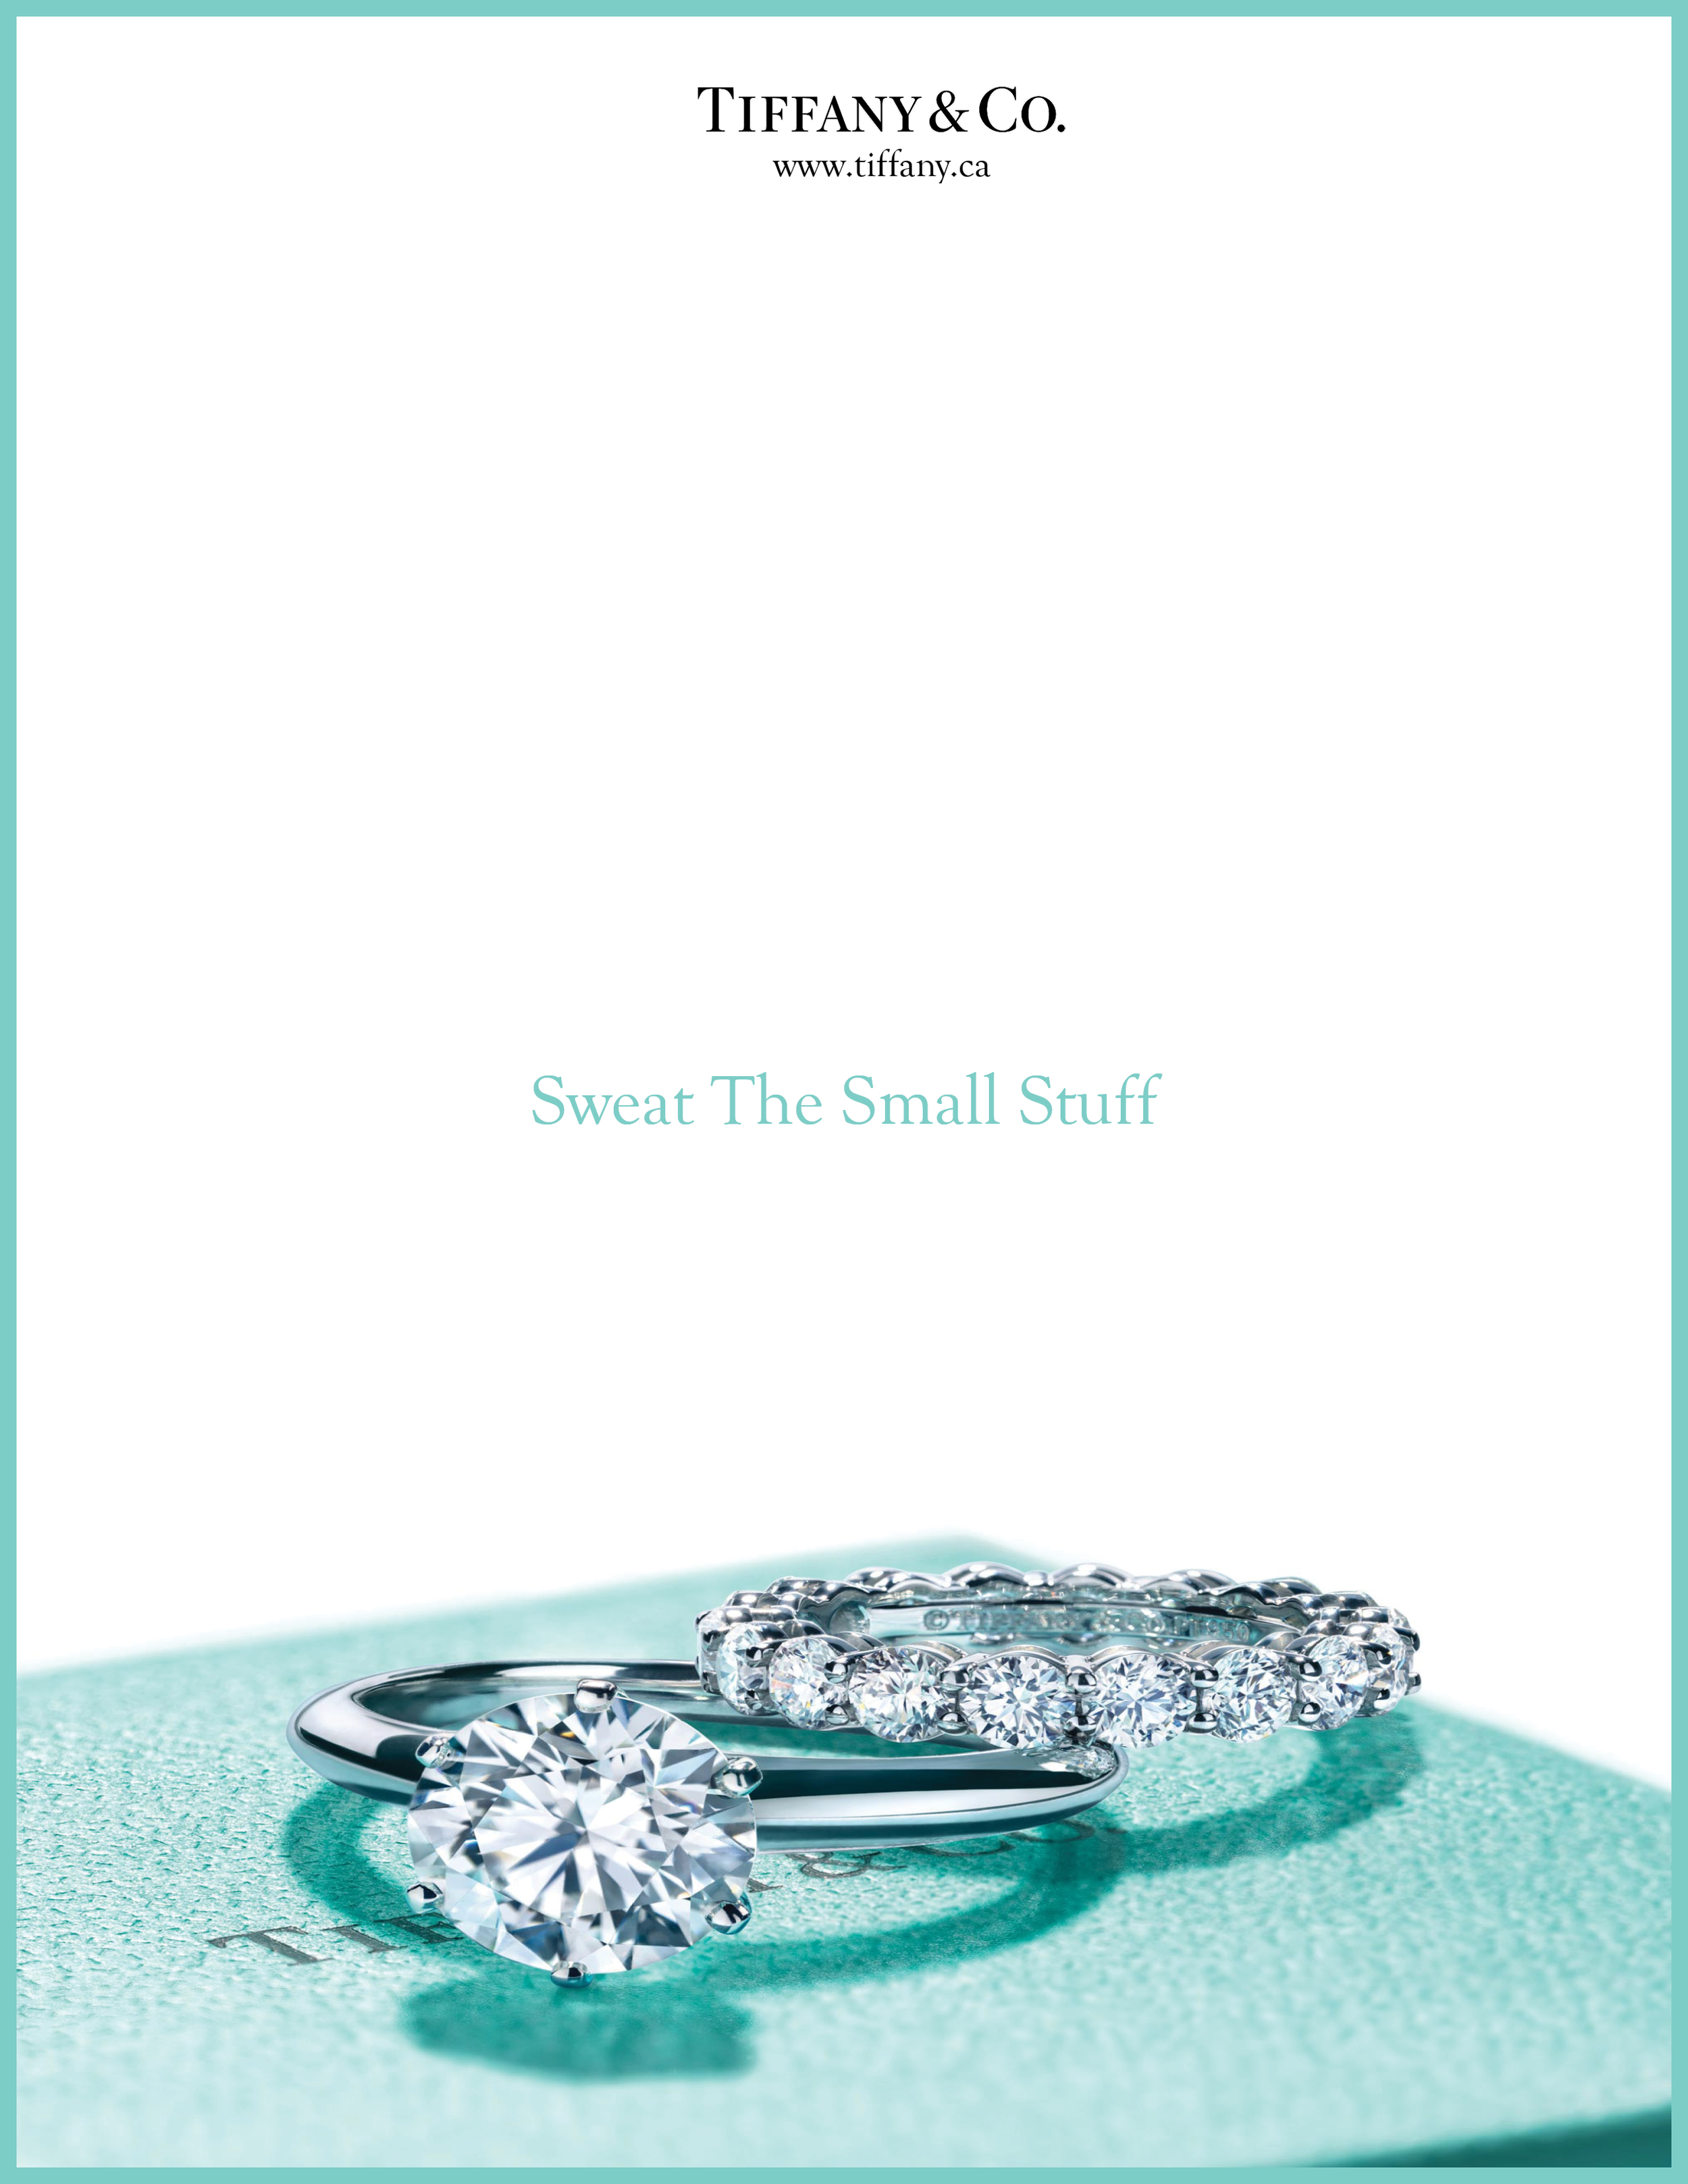 Tiffany & Co. Campaign (SPEC) — CLEMENTWONG